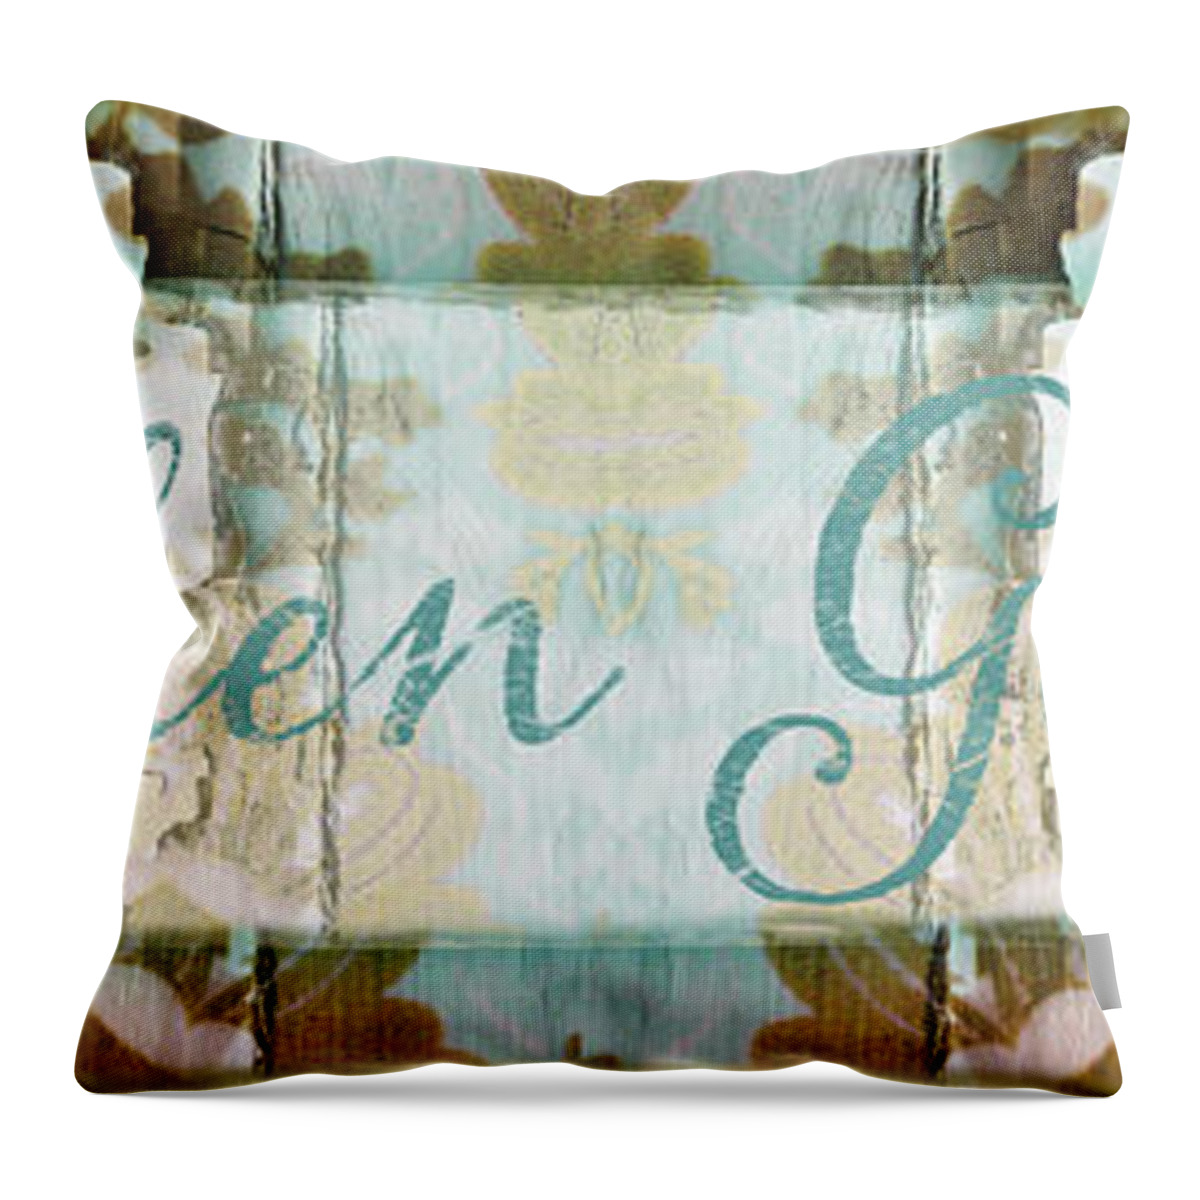 Kitchen Goddess Throw Pillow featuring the painting Kitchen Goddess by Mindy Sommers